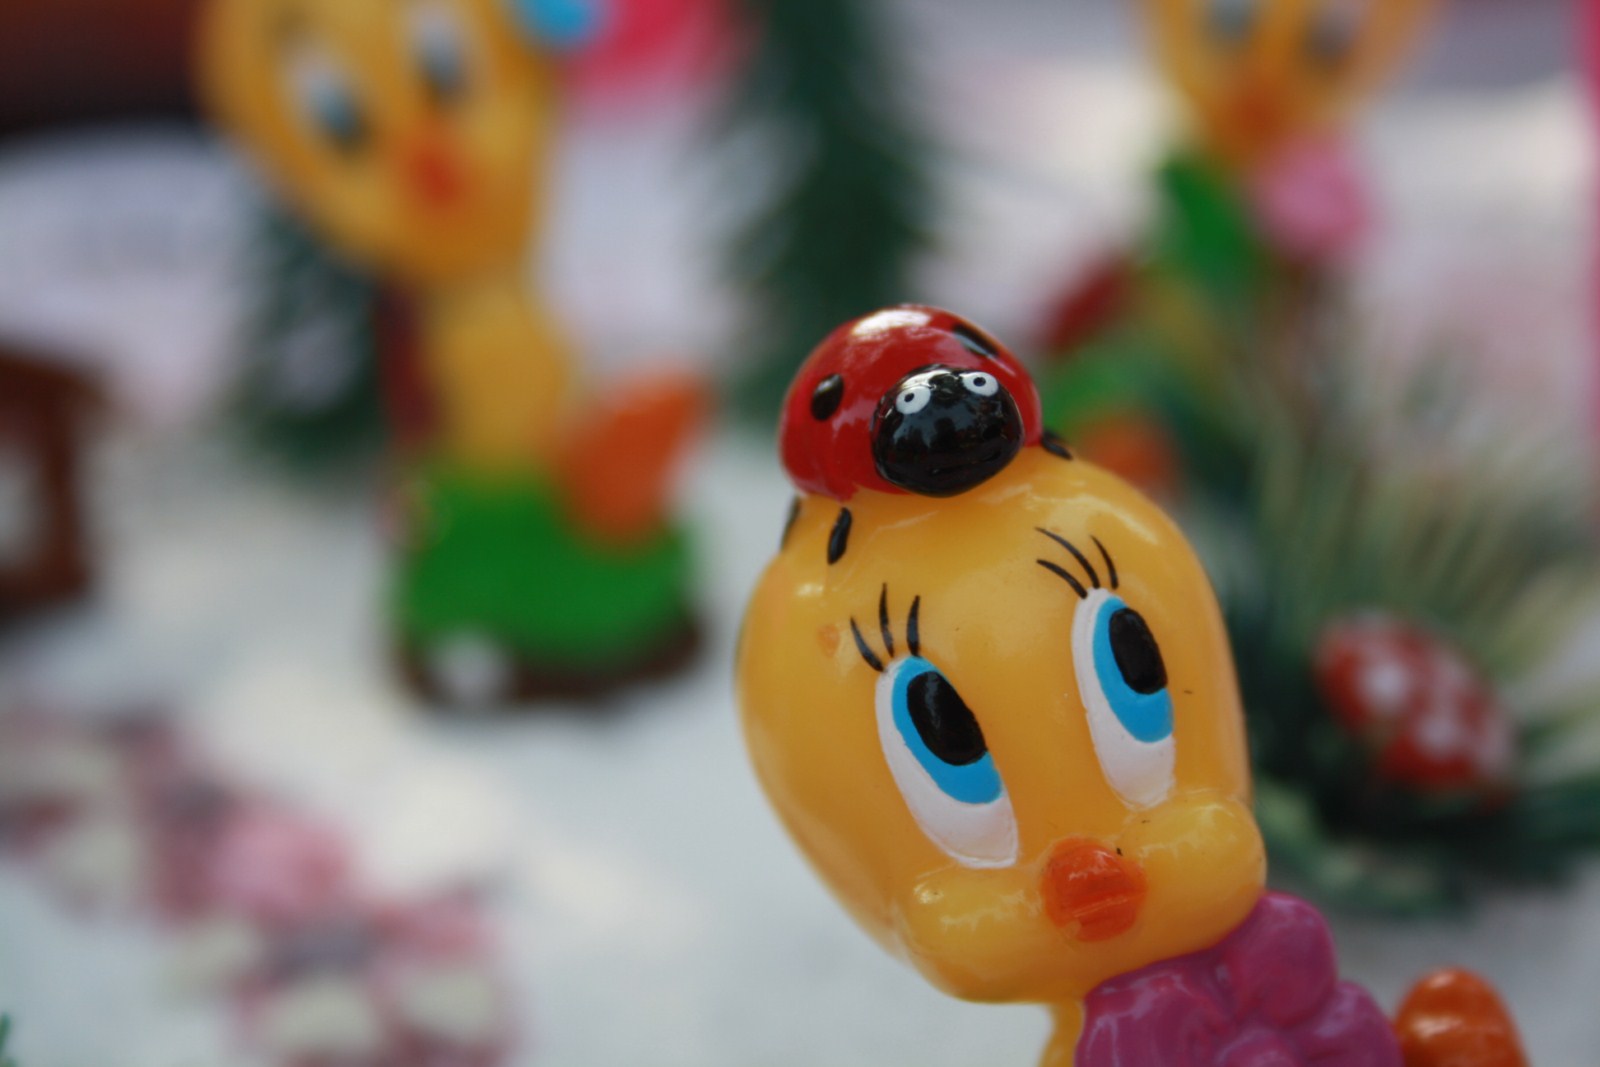 a close up of a toy bird with a lady bug on its head